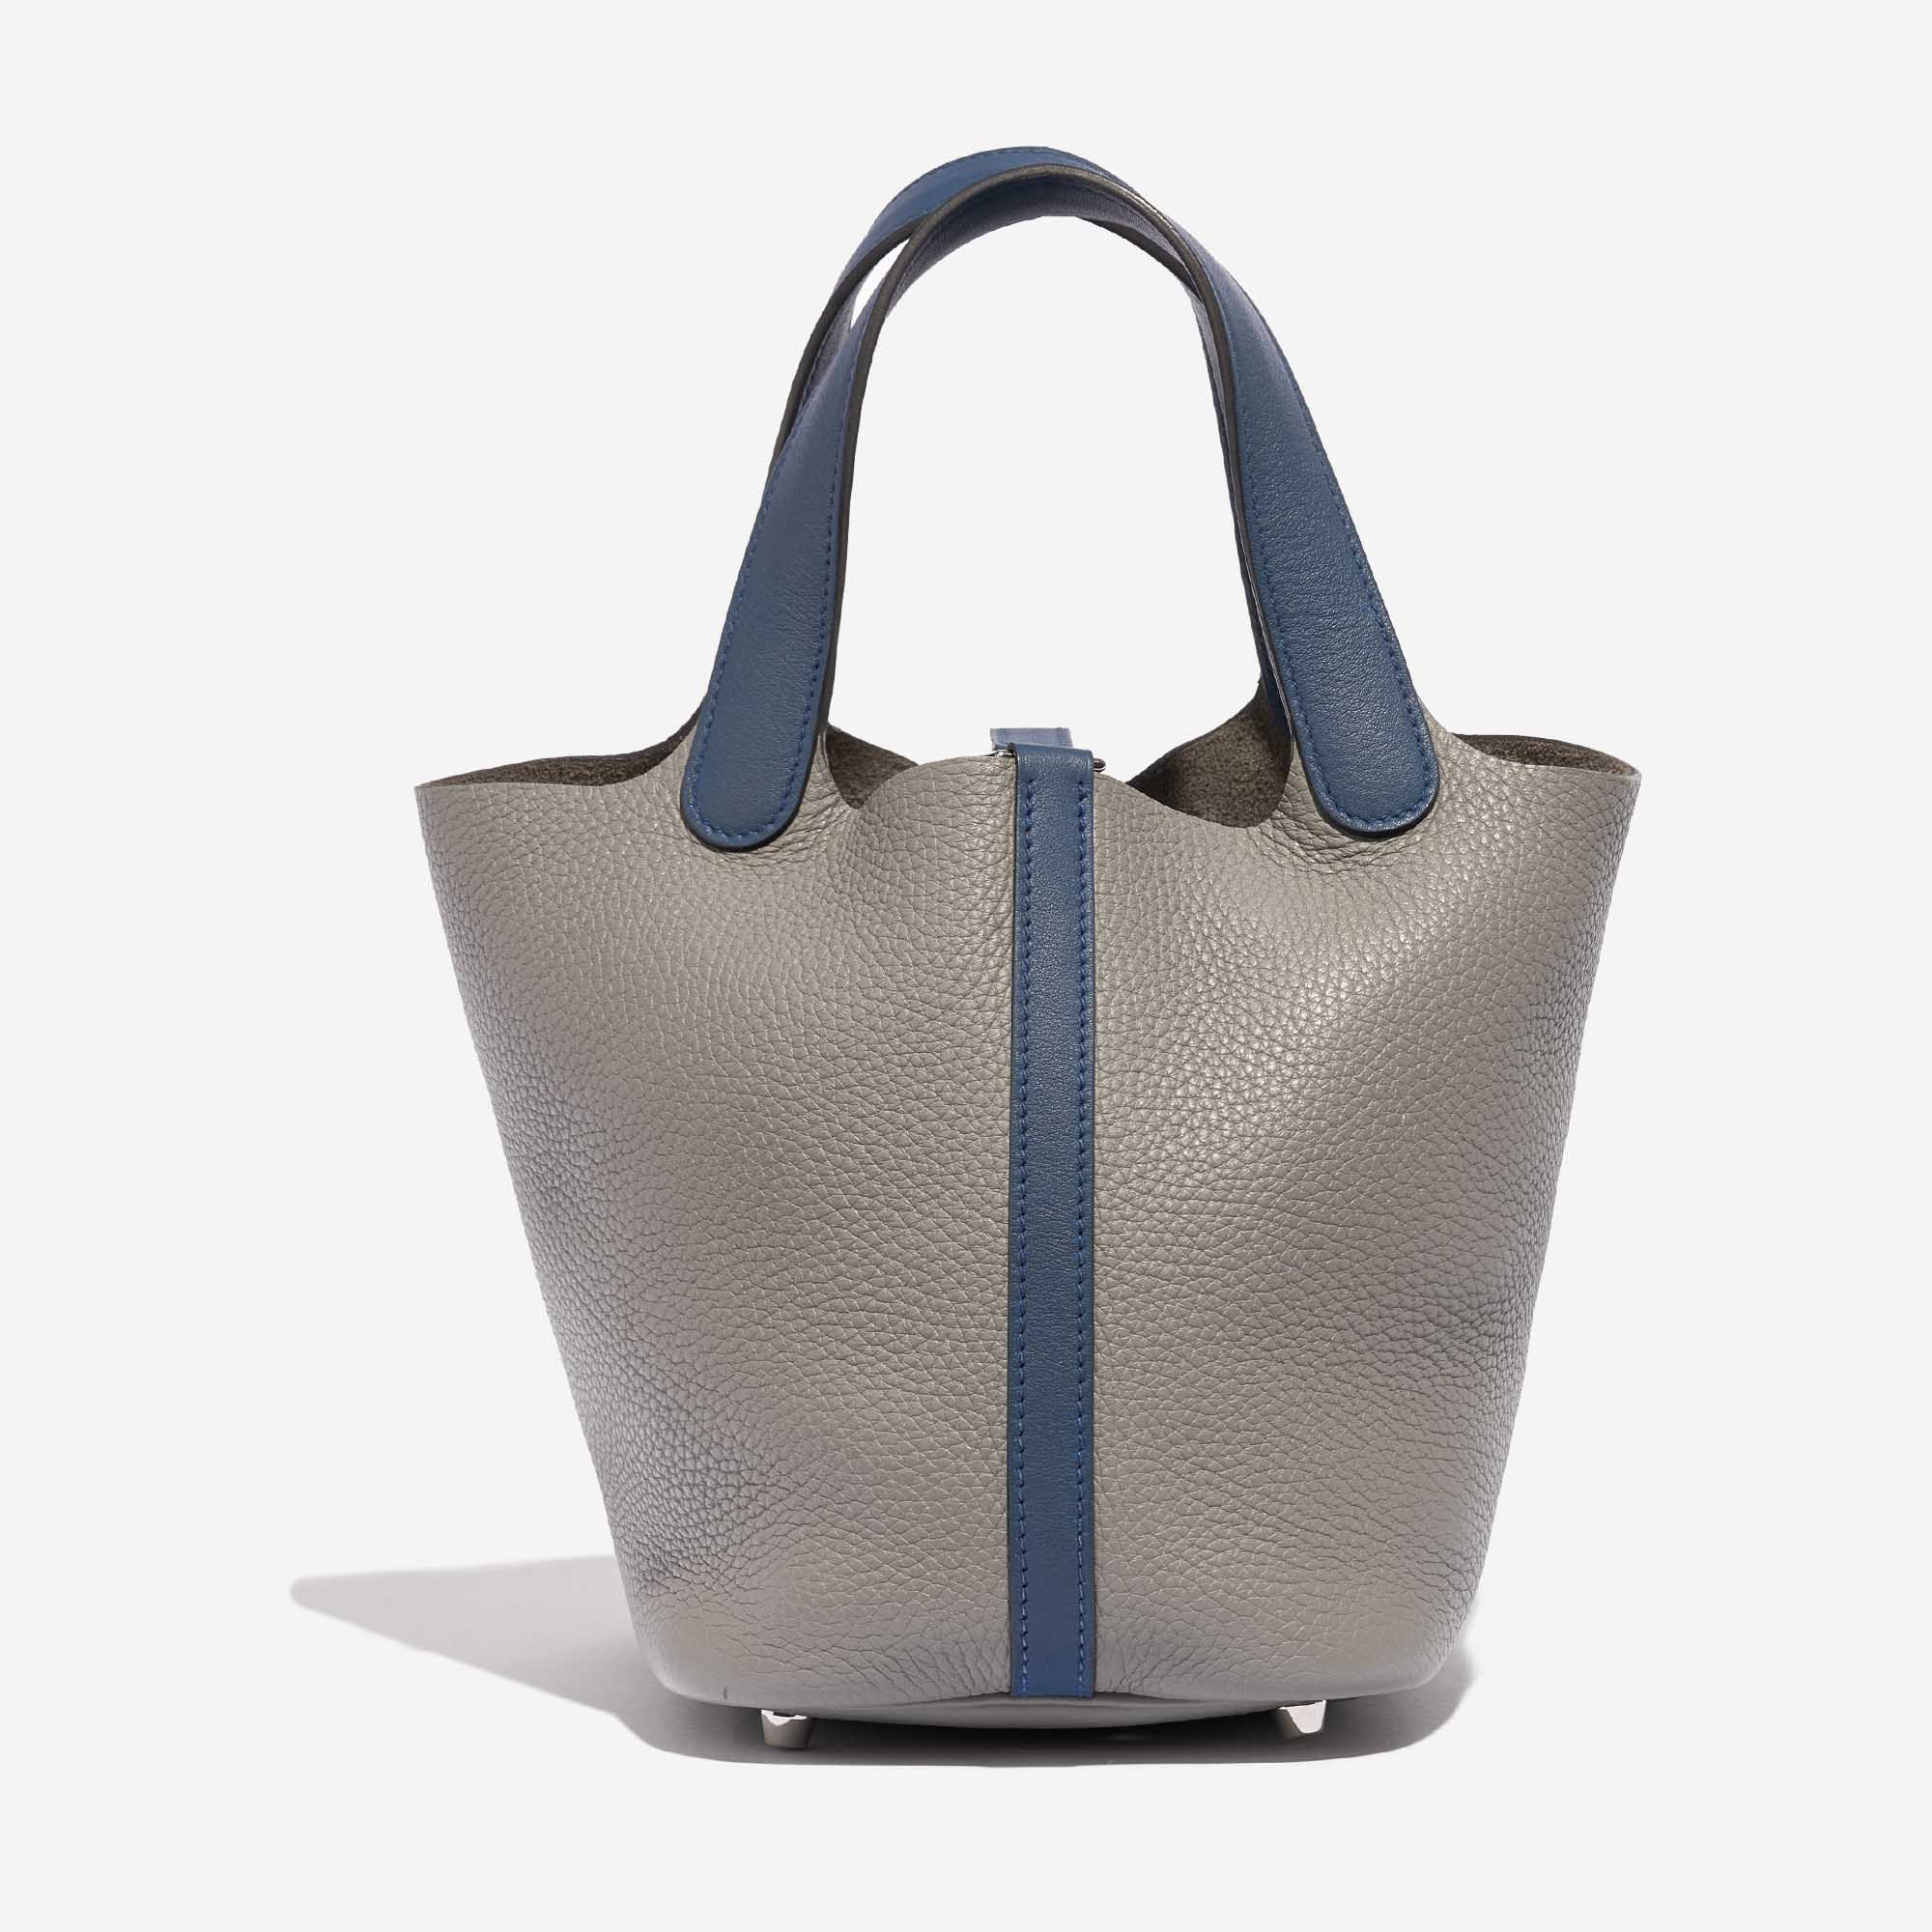 Pre-owned Hermès bag Picotin 18 Clemence / Swift Gris Mouette / Blue Agate Blue Back | Sell your designer bag on Saclab.com